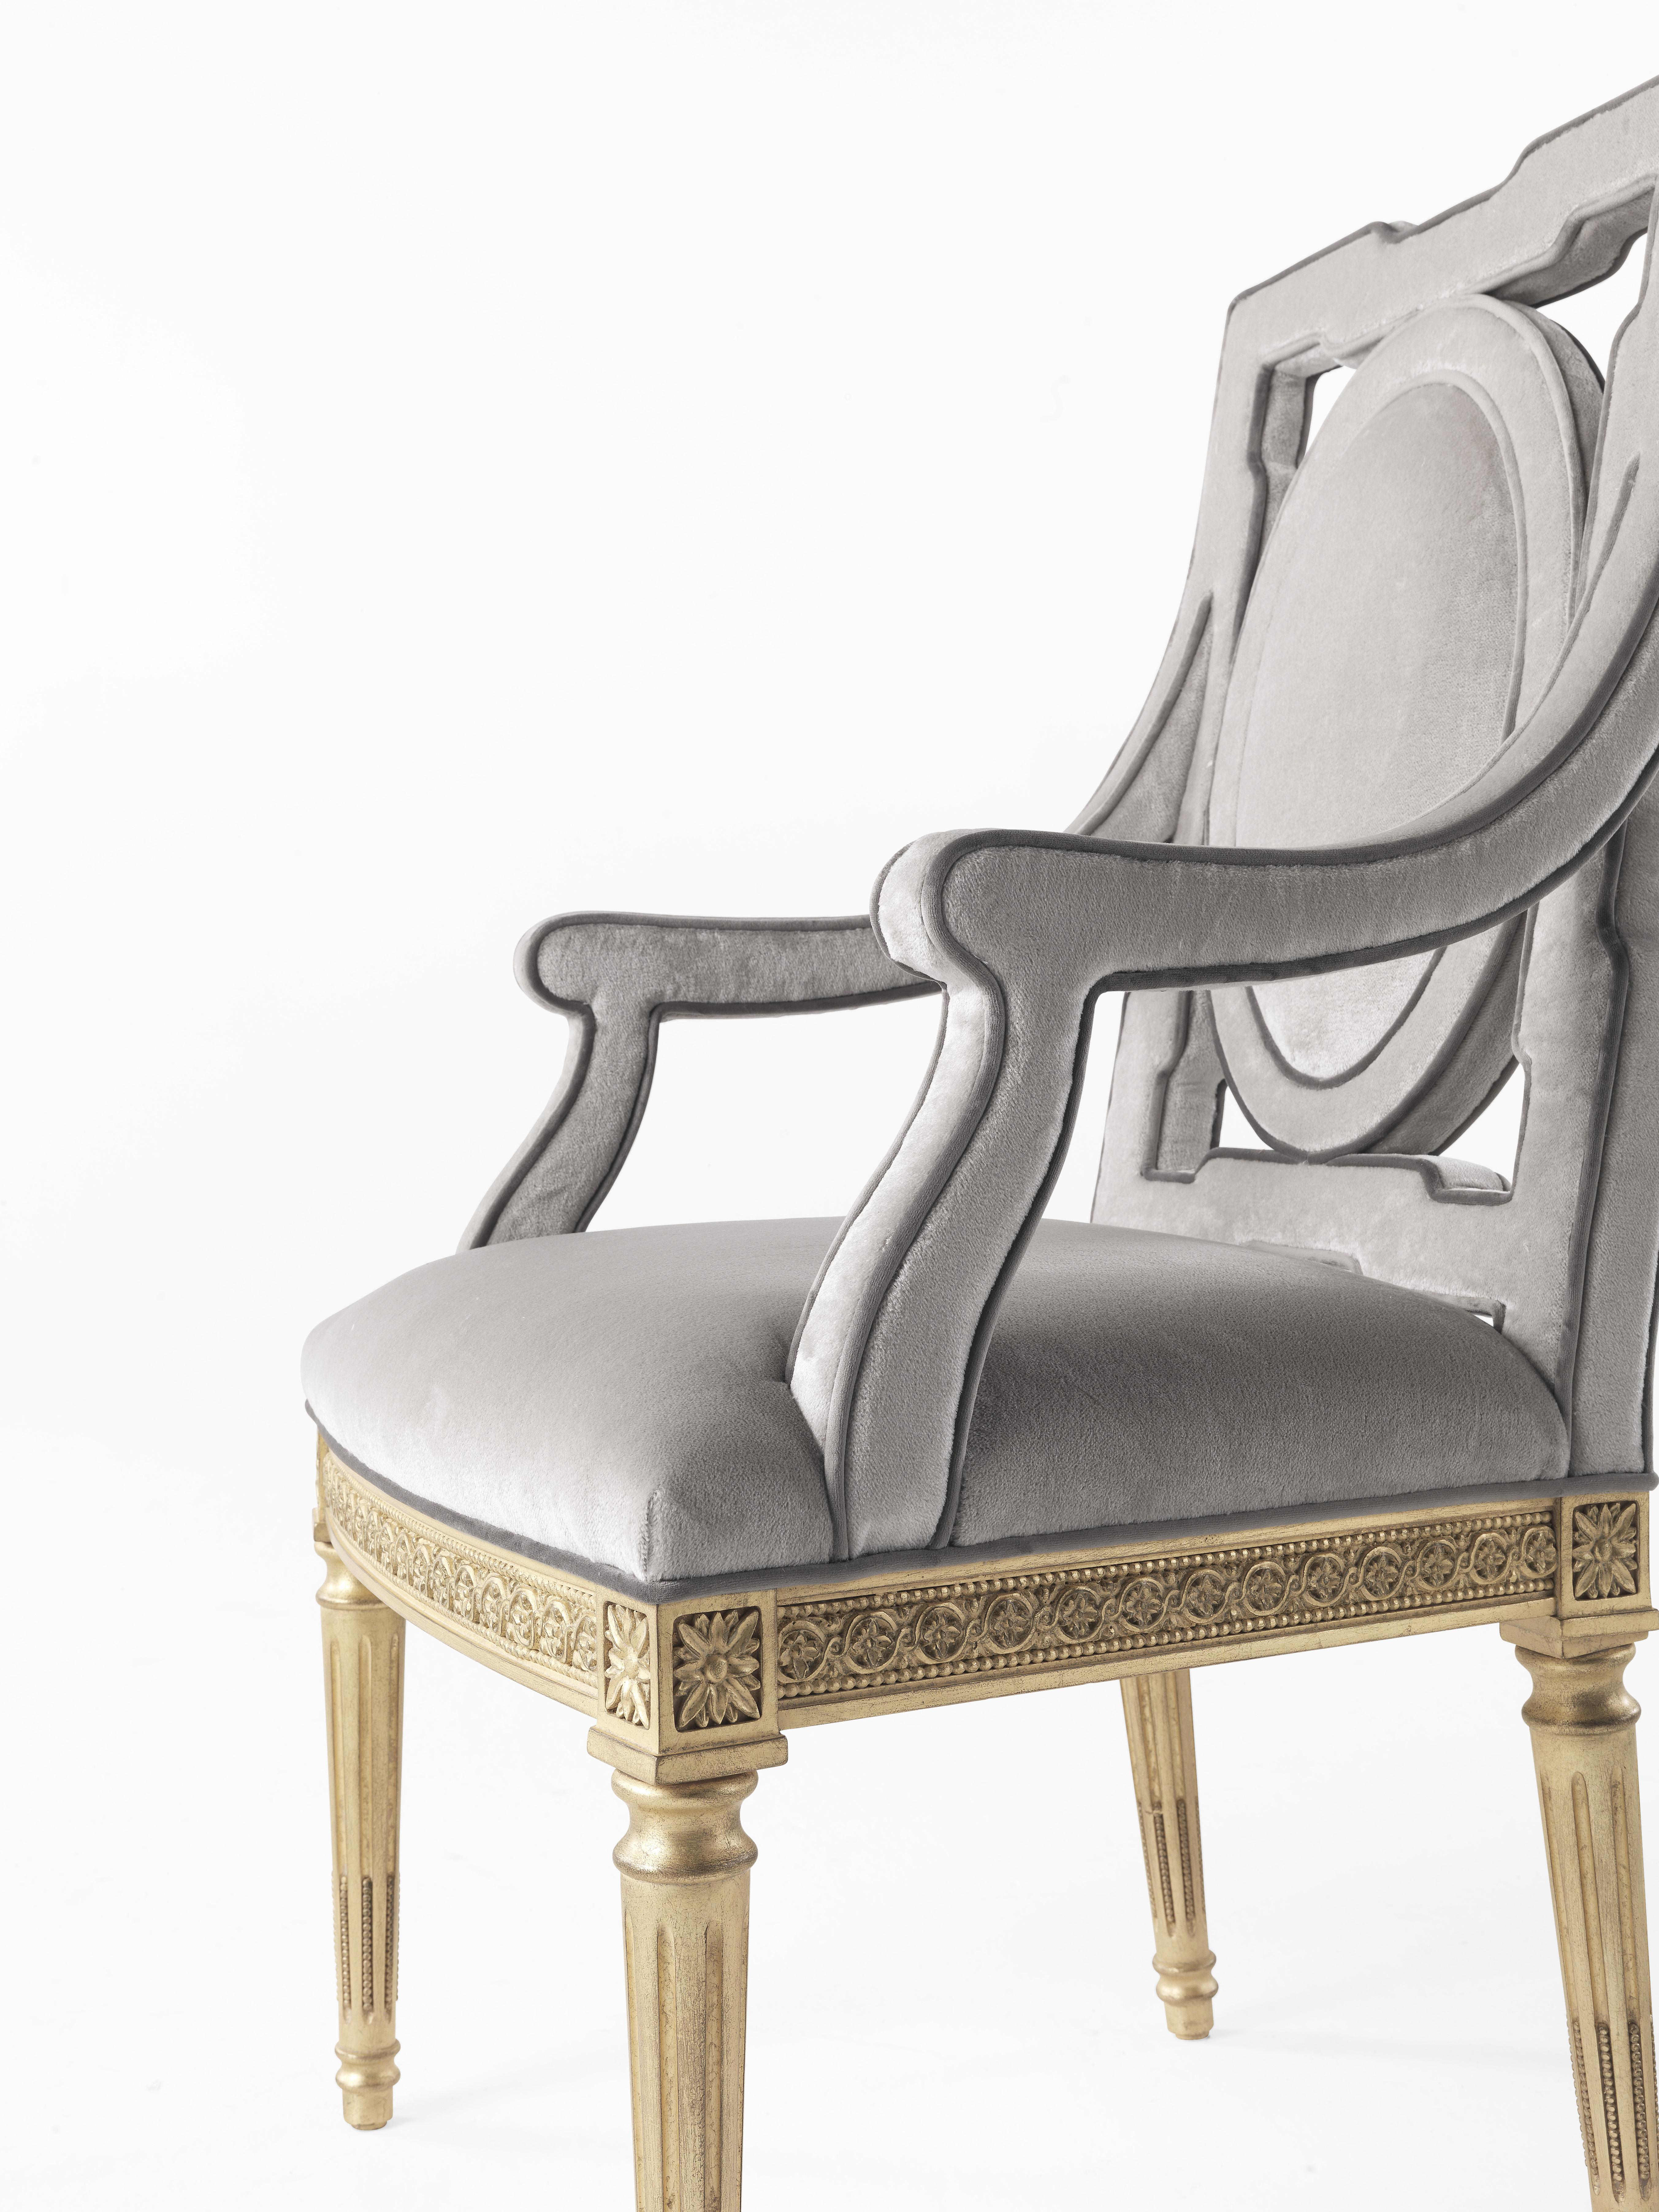 Contemporary 21st Century Satin Chair with Arms in Wood and Fabric in Style of Louis XVI For Sale